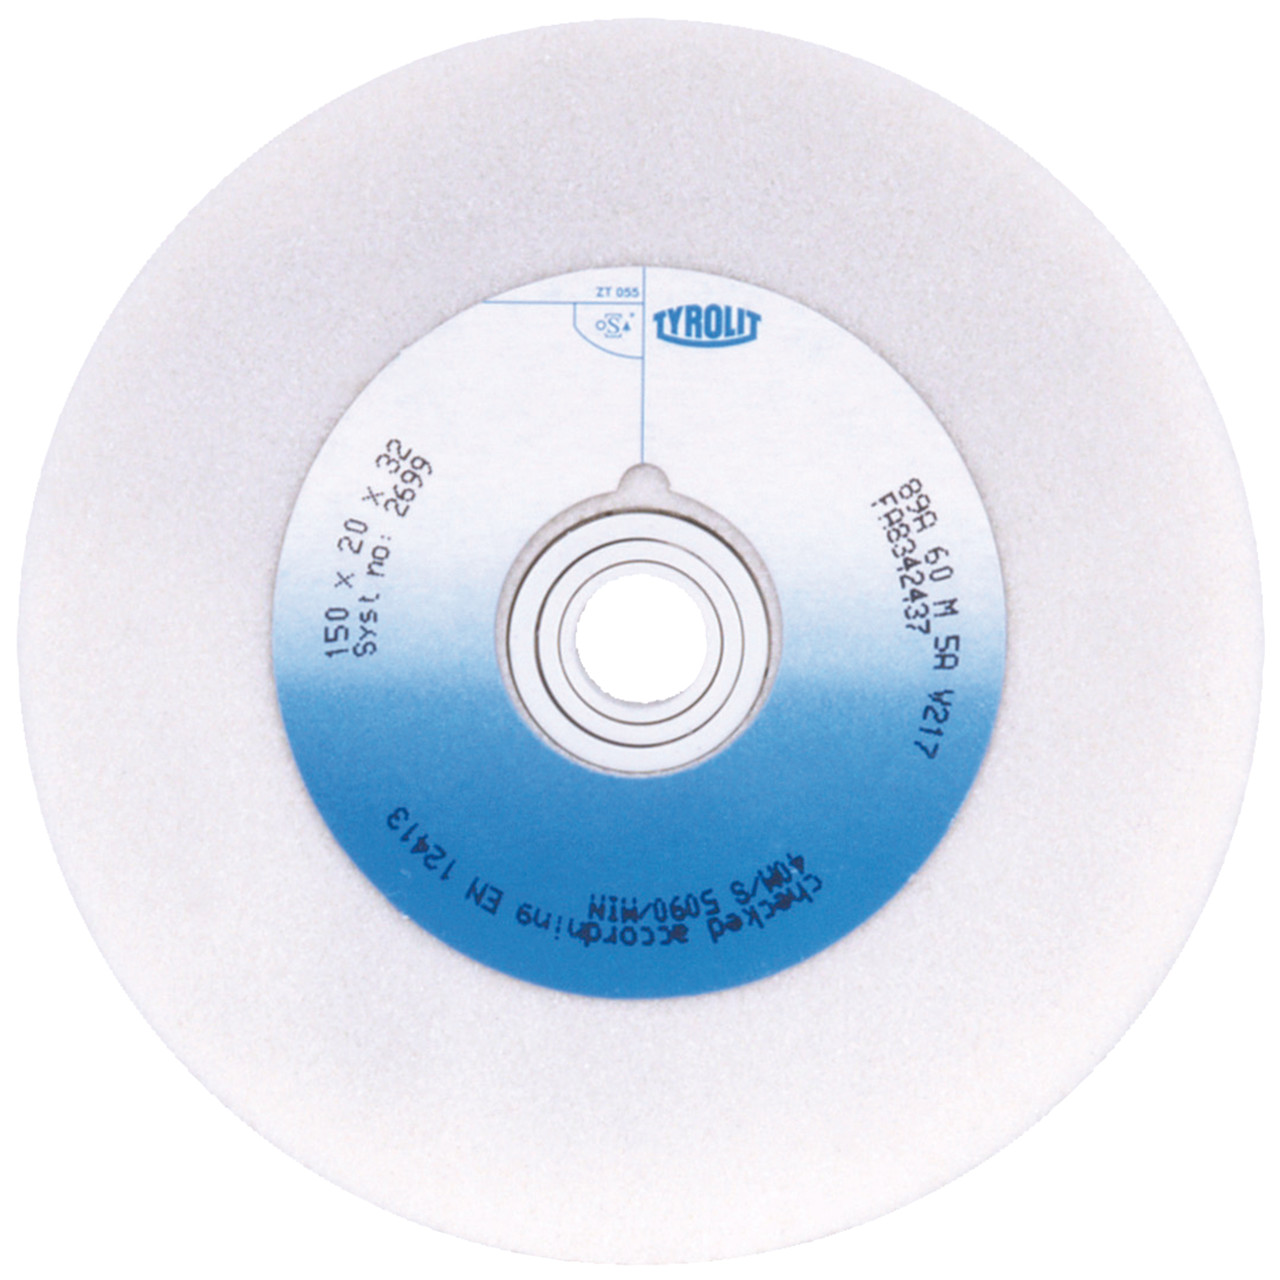 Tyrolit Conventional ceramic grinding discs DxDxH 250x32x32 For high-alloy steels and HSS, shape: 1, Art. 126665